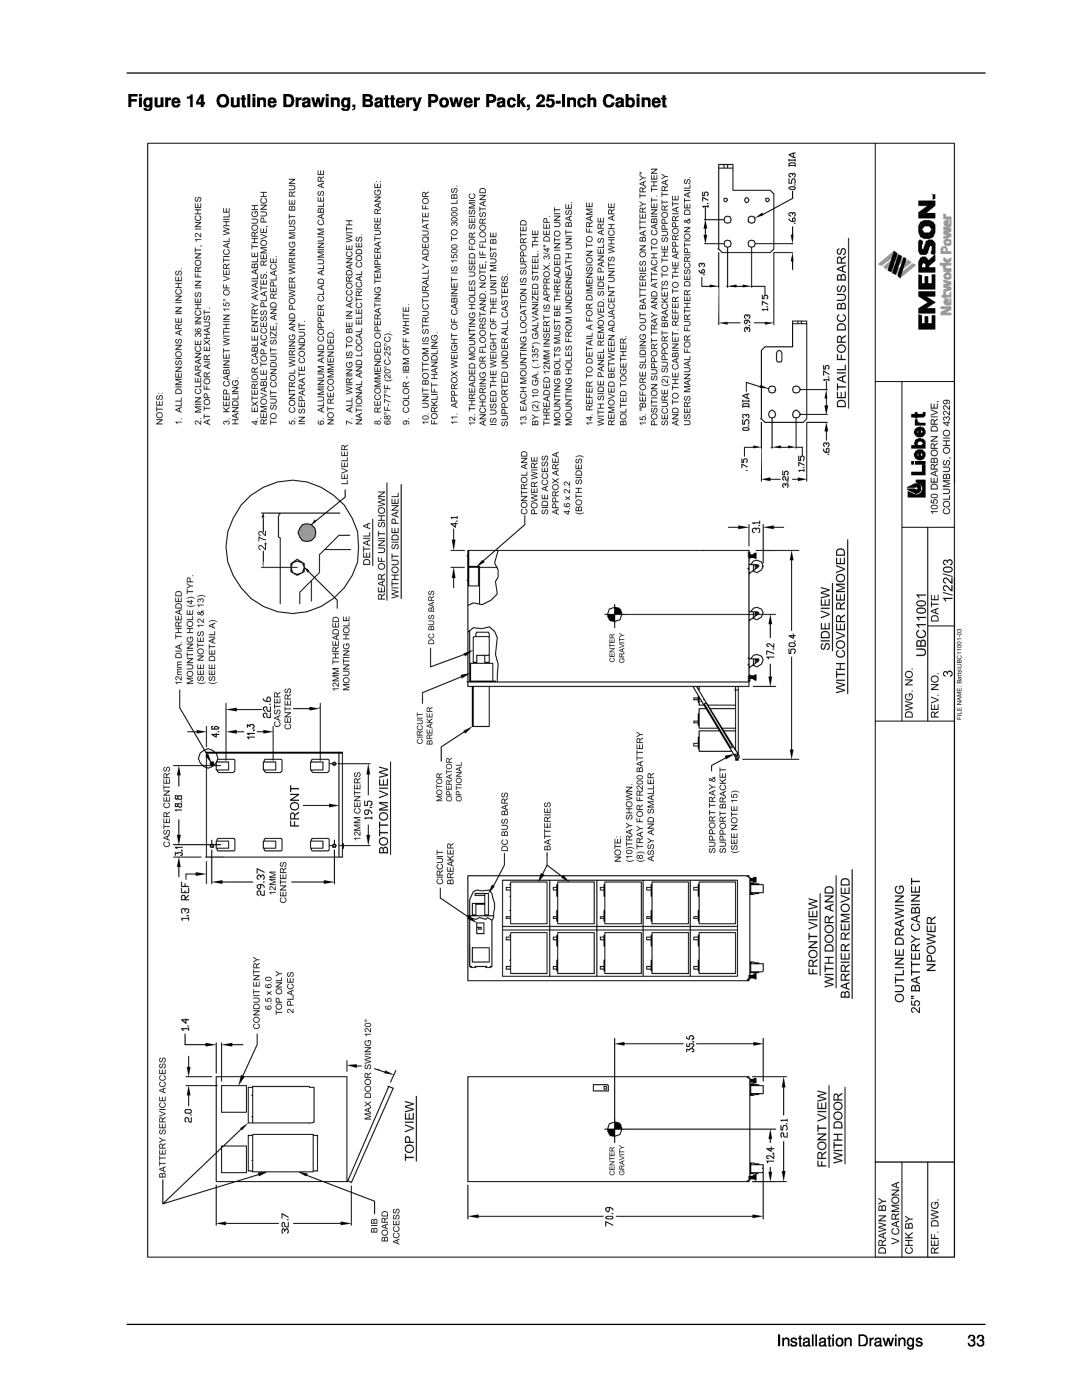 Emerson 30-130 kVA installation manual Battery Power Pack, 25-Inch Cabinet, Outline Drawing, 1/22/03 